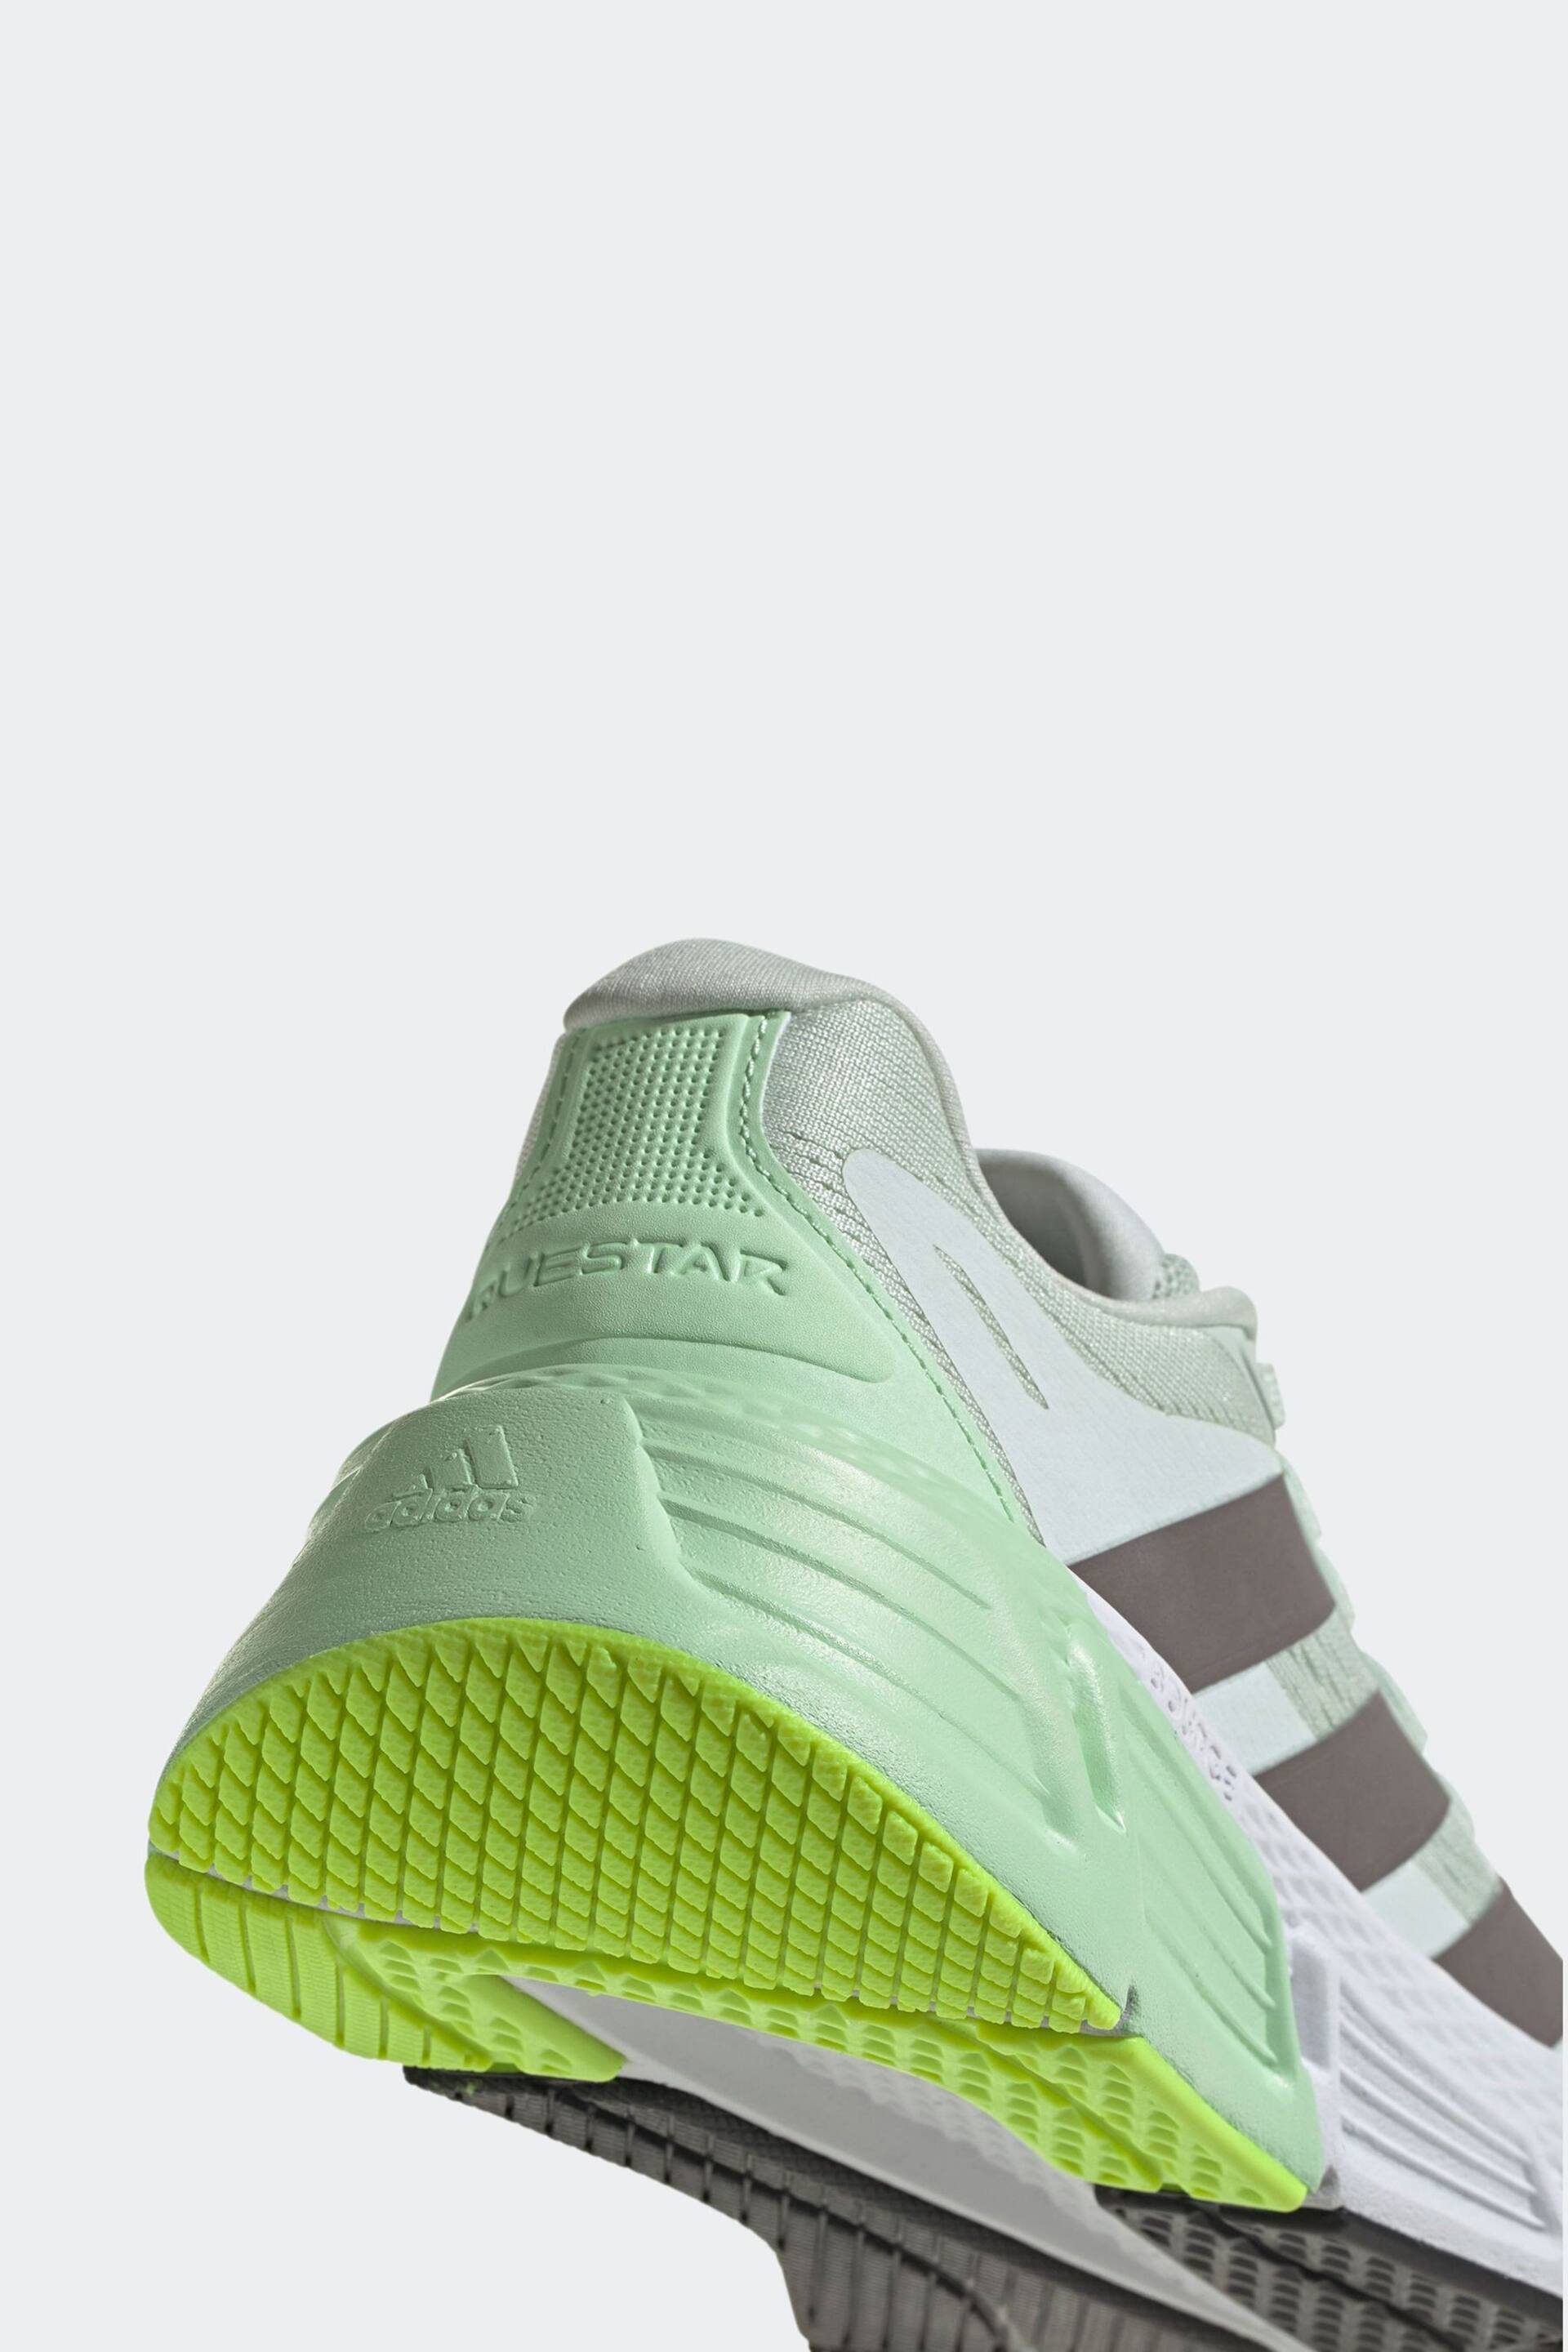 adidas Green Questar Trainers - Image 7 of 9